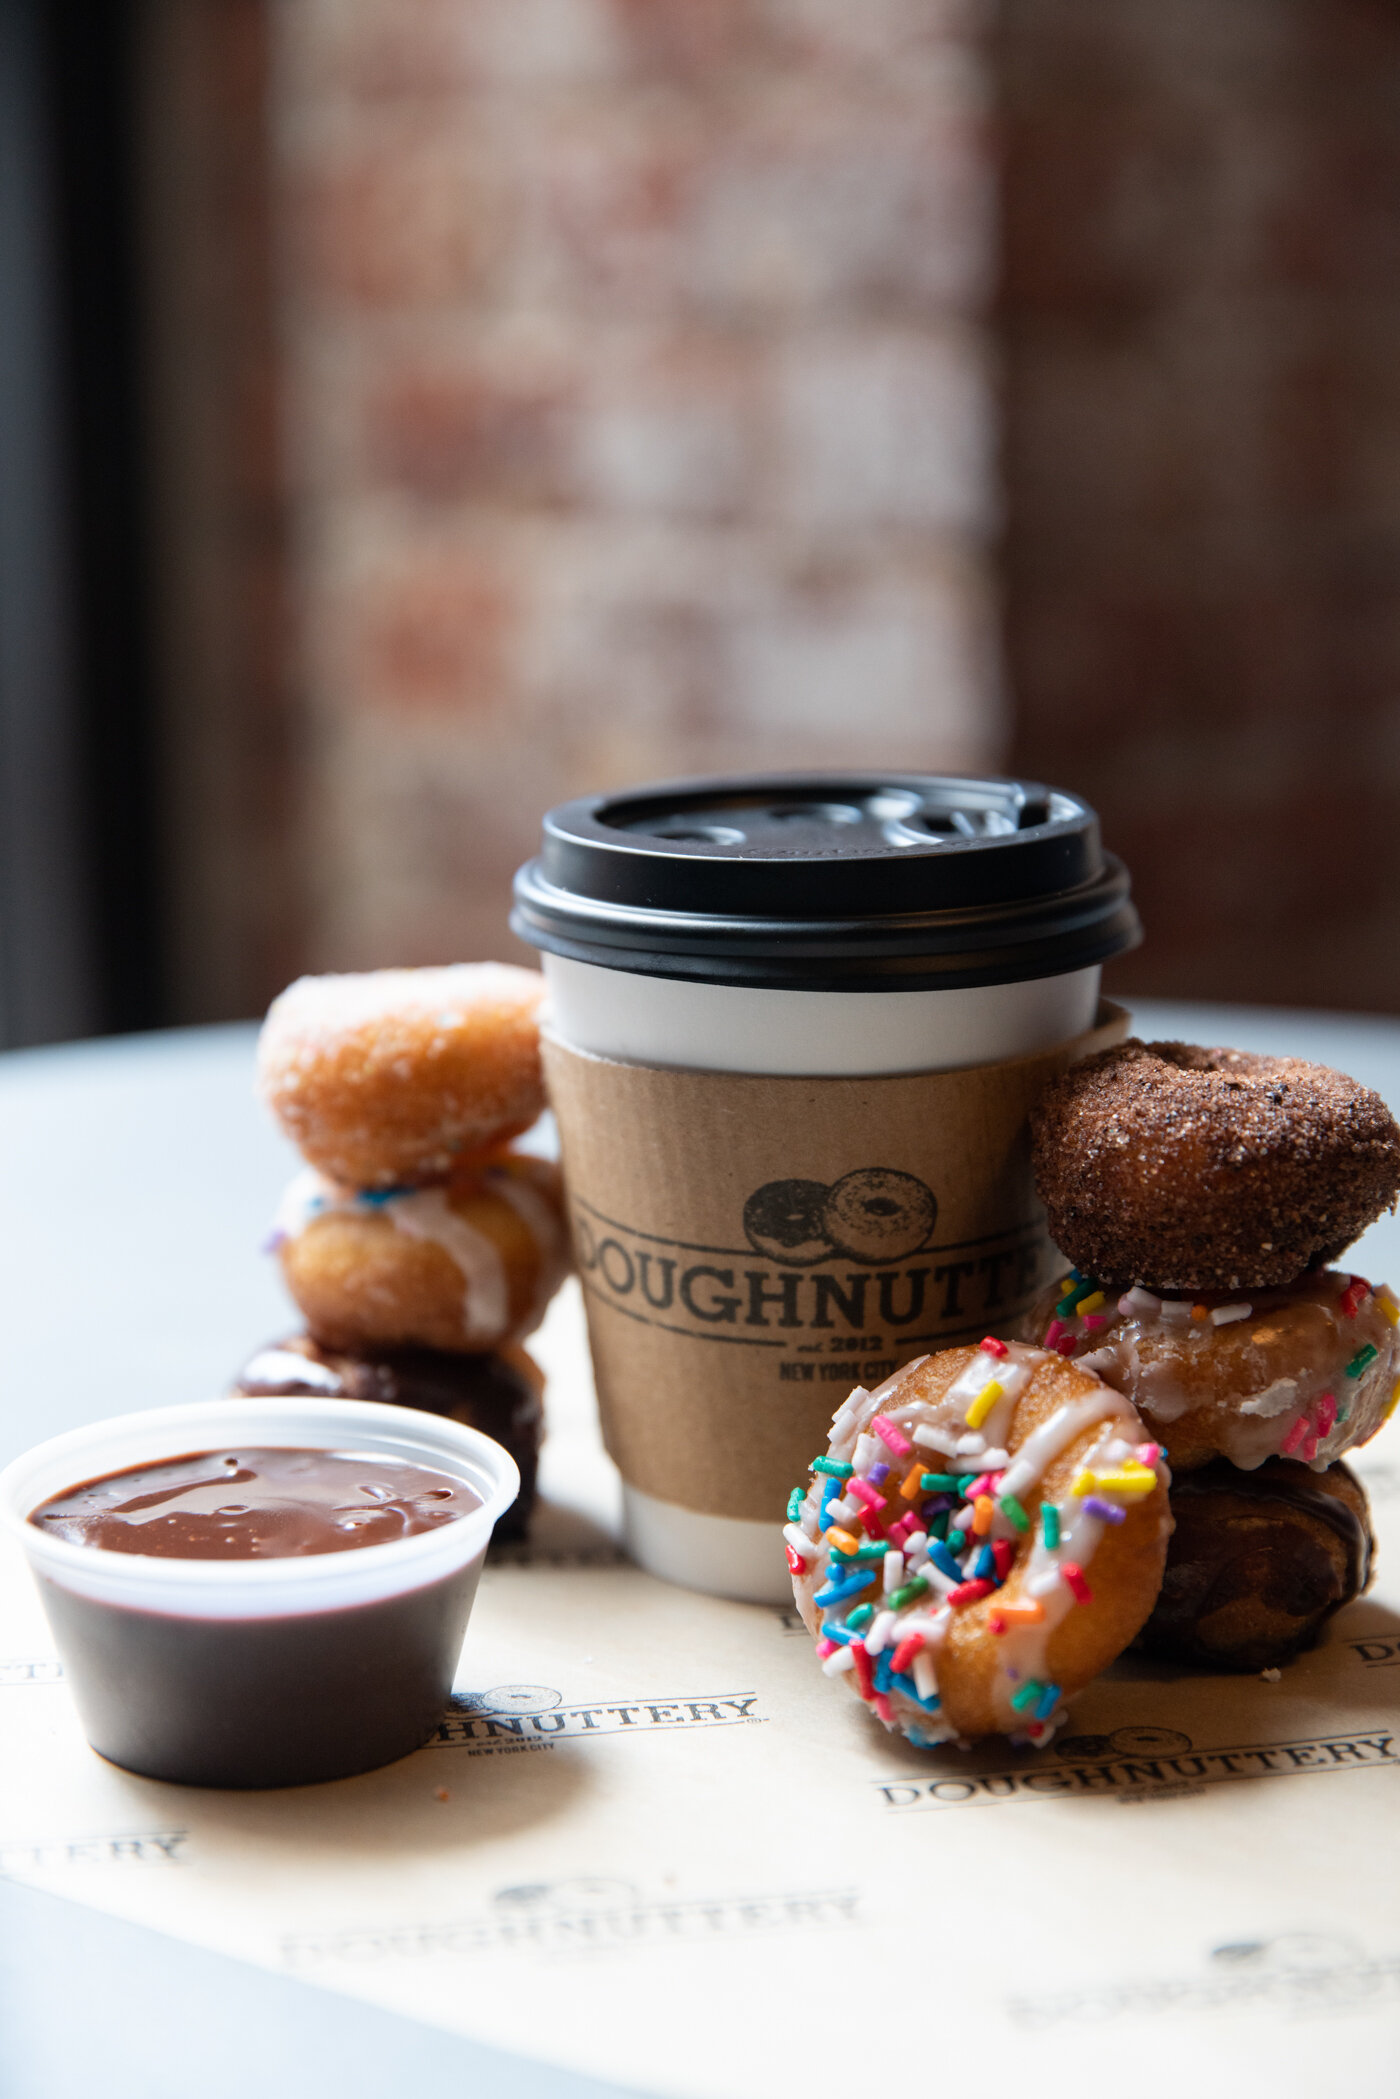 cup of coffee reading doughnuttery with mini dognuts surrounding it with a chocolate dipping sauce to the side 